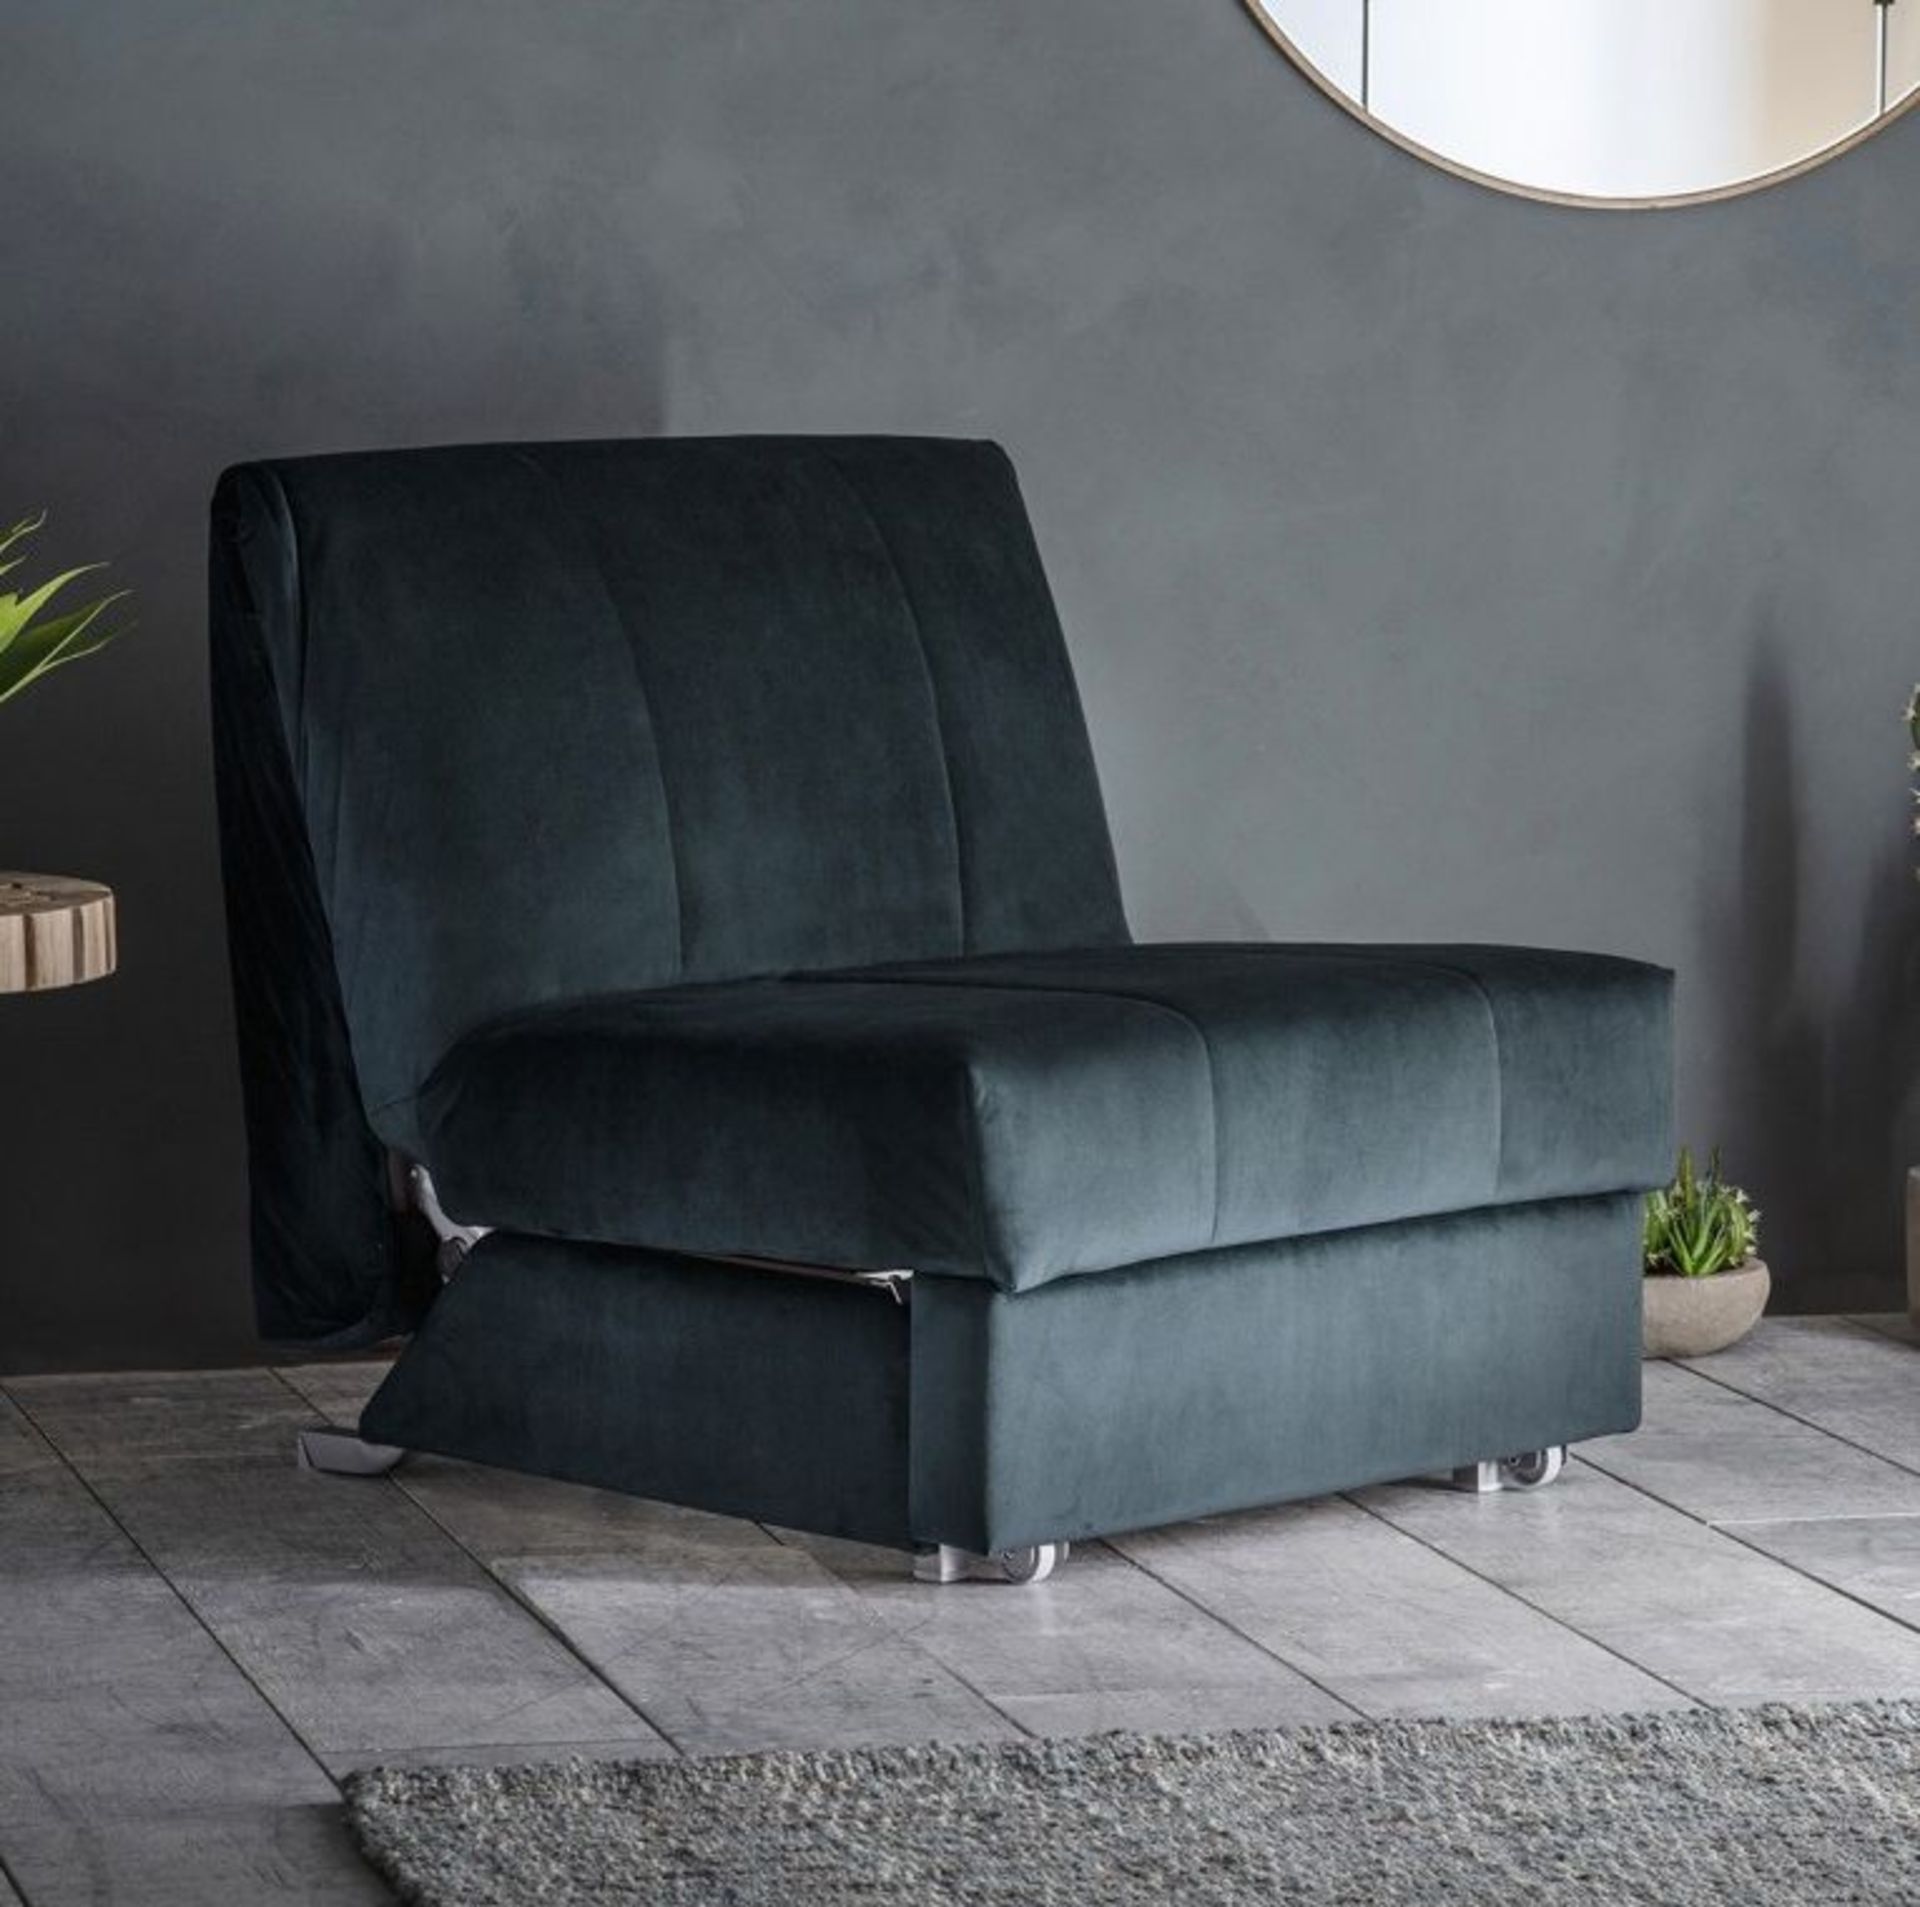 Metz Sofa 80cm Berwick Stone Upholstered The Metz collection is ideal even for smaller spaces,